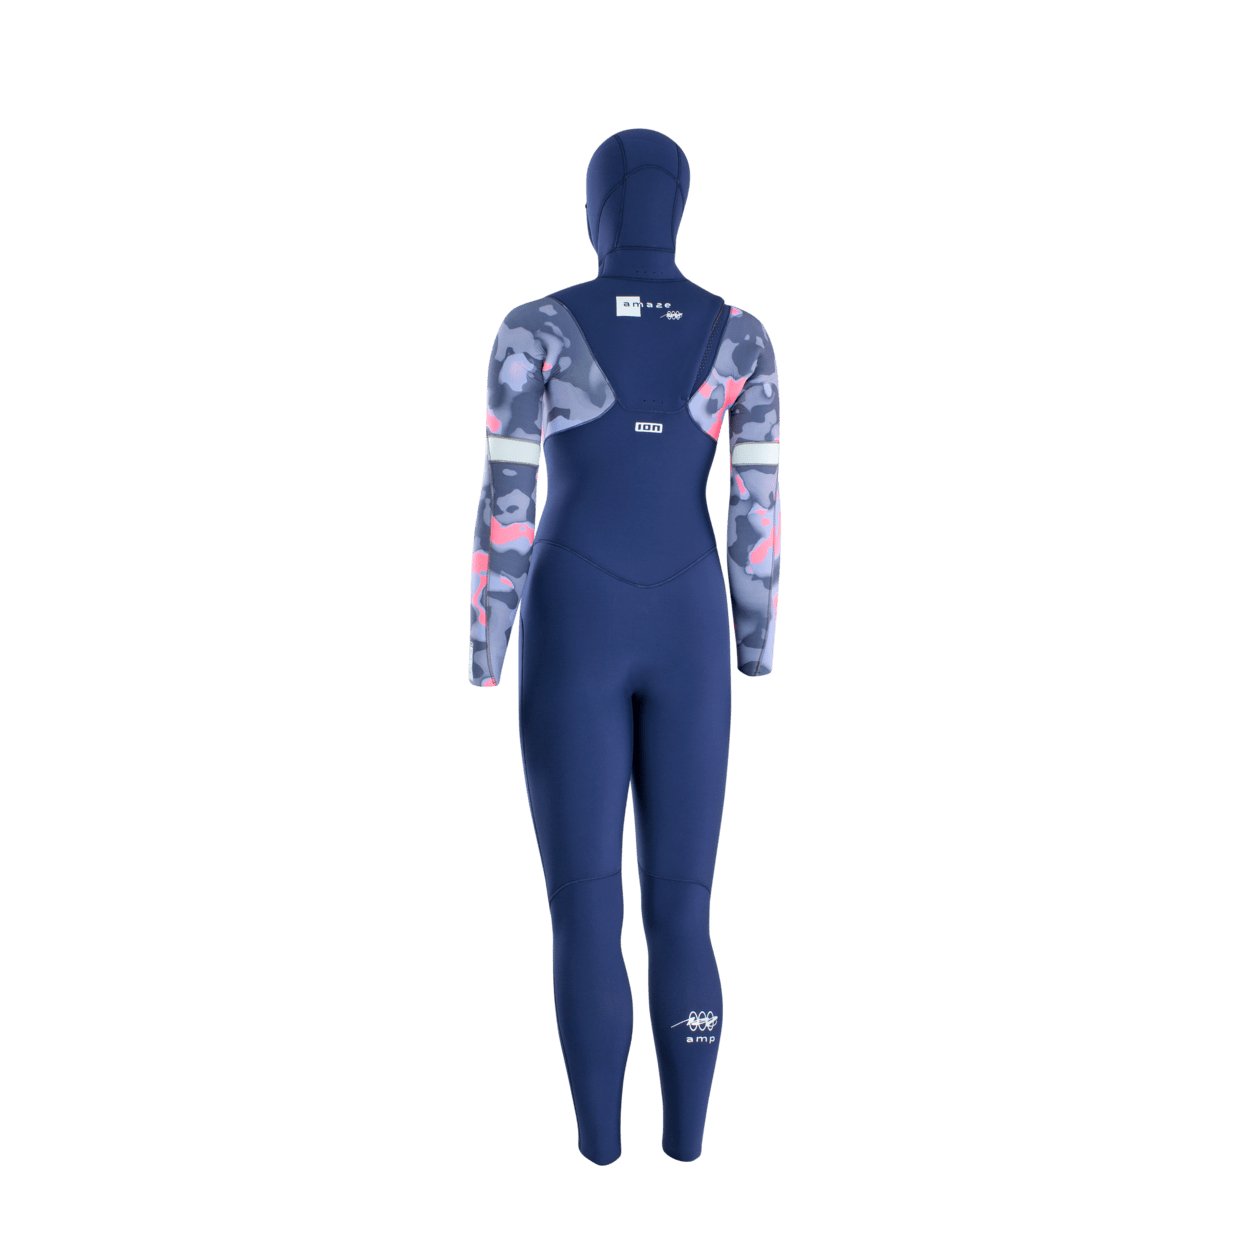 ION Women Wetsuit Amaze Amp 6/5 Hood Front Zip 2023 - Worthing Watersports - 9010583057781 - Wetsuits - ION Water